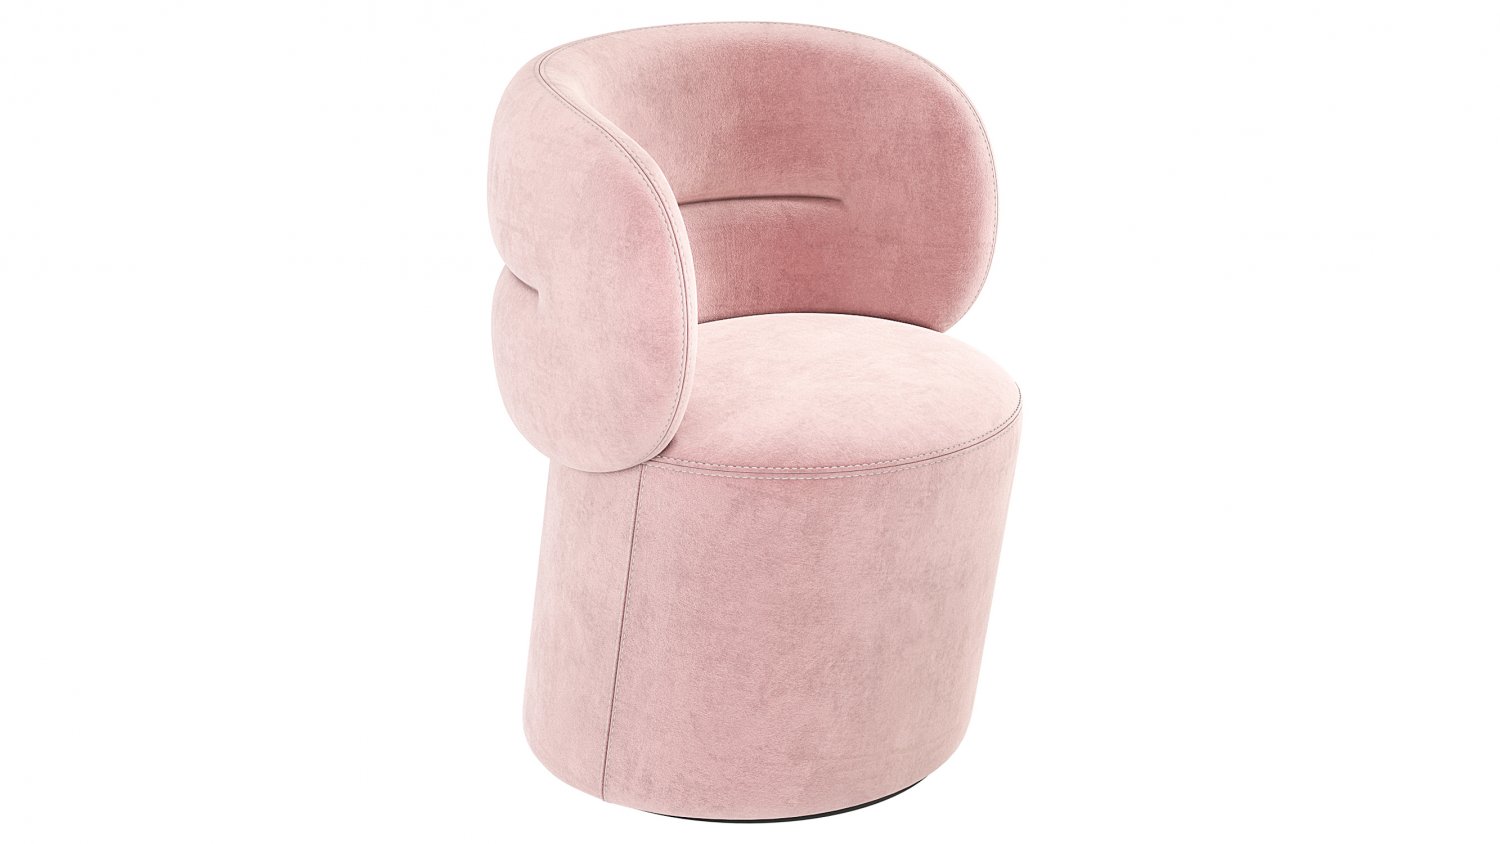 Patricia Urquiola, a 'Smock' lounge chair from Moroso Italy